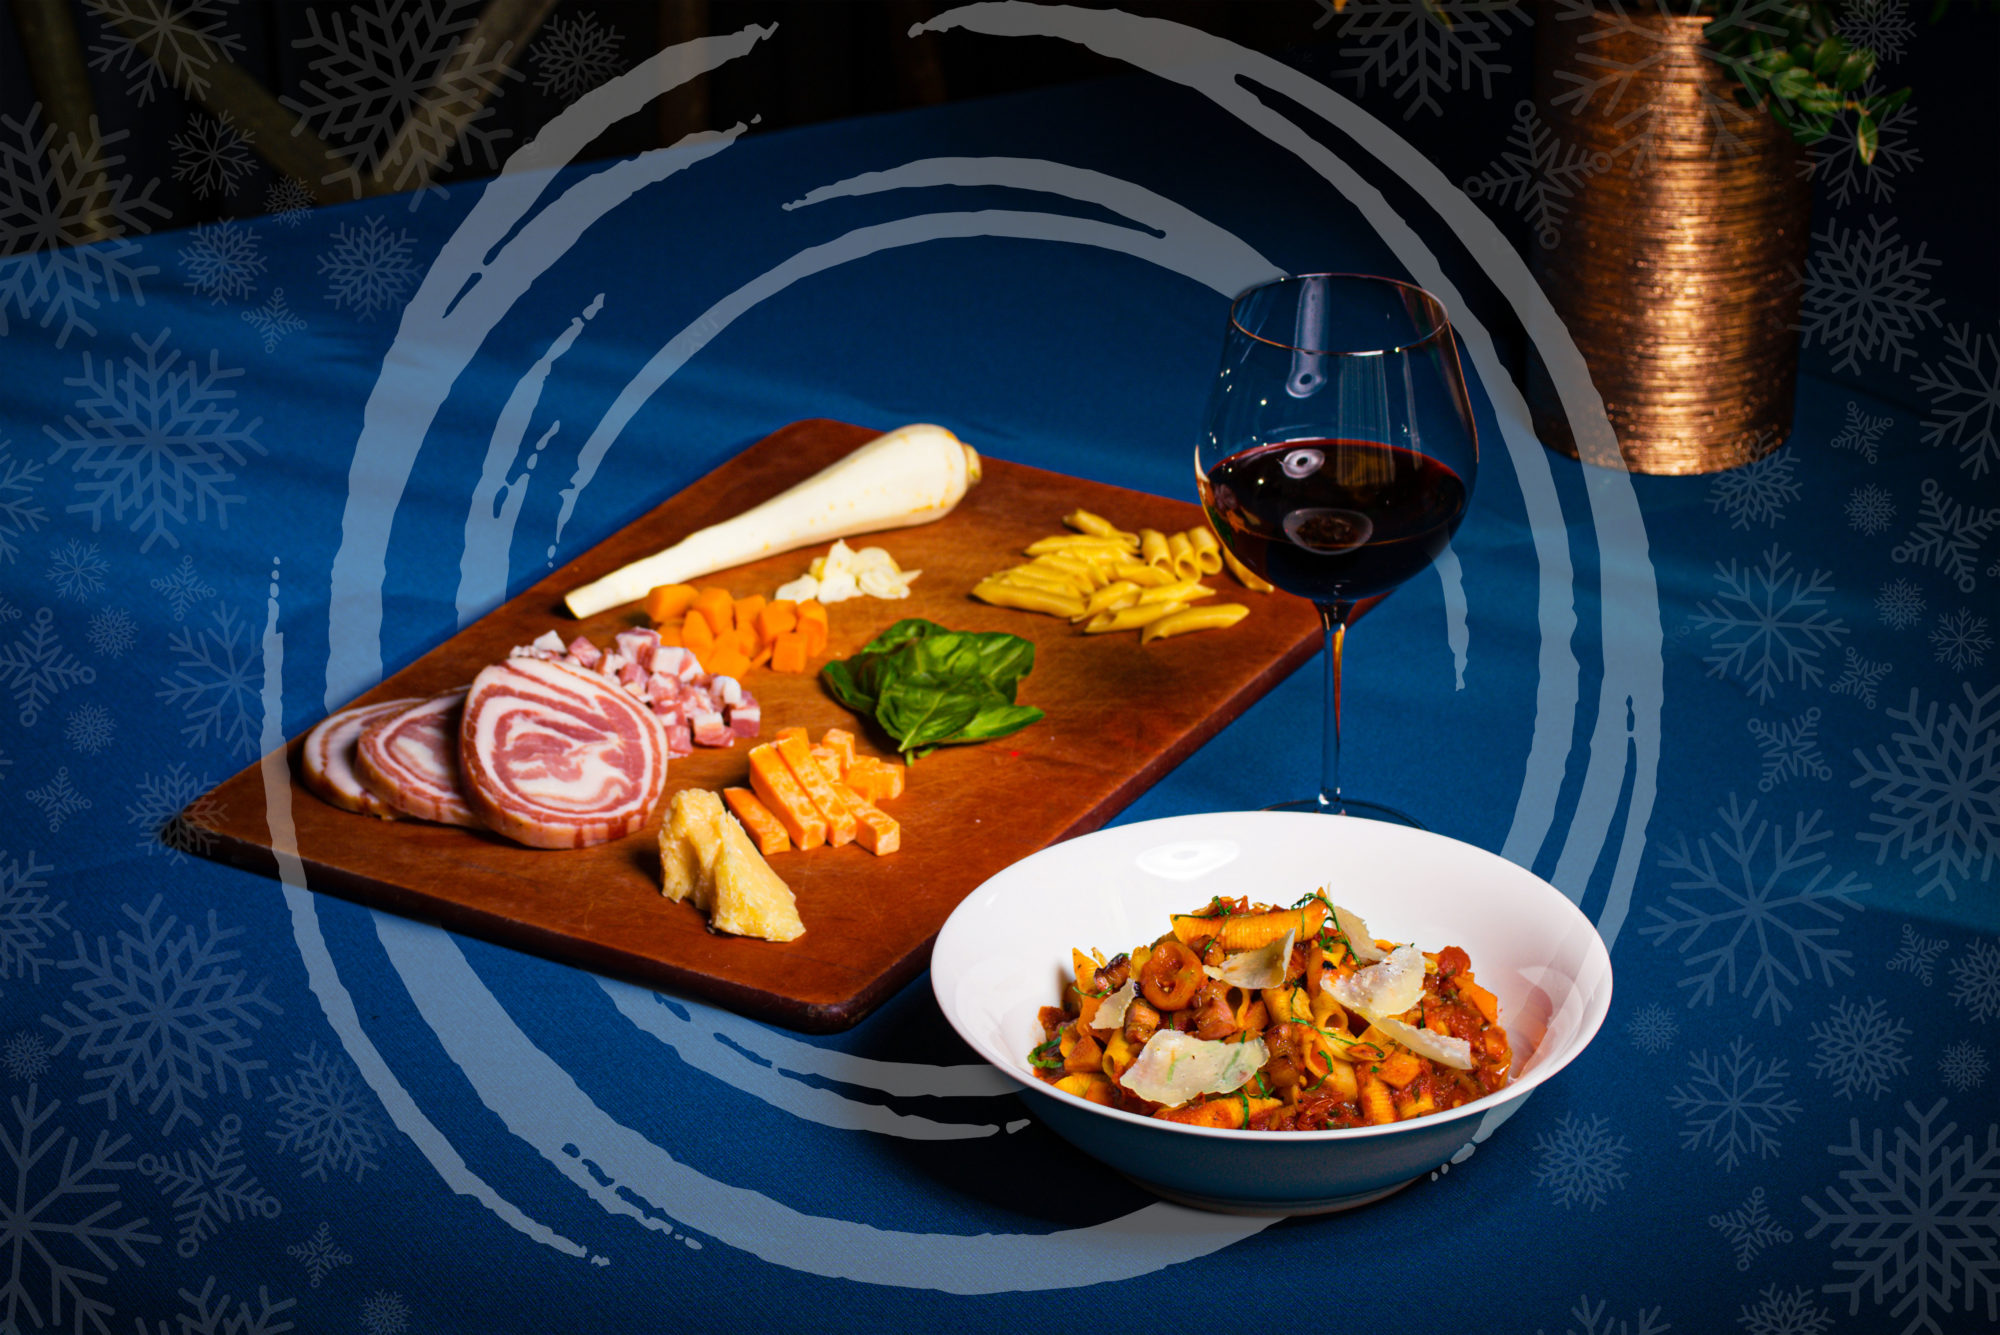 A charcuterie board with a bowl of pasta and a glass of wine next to it.